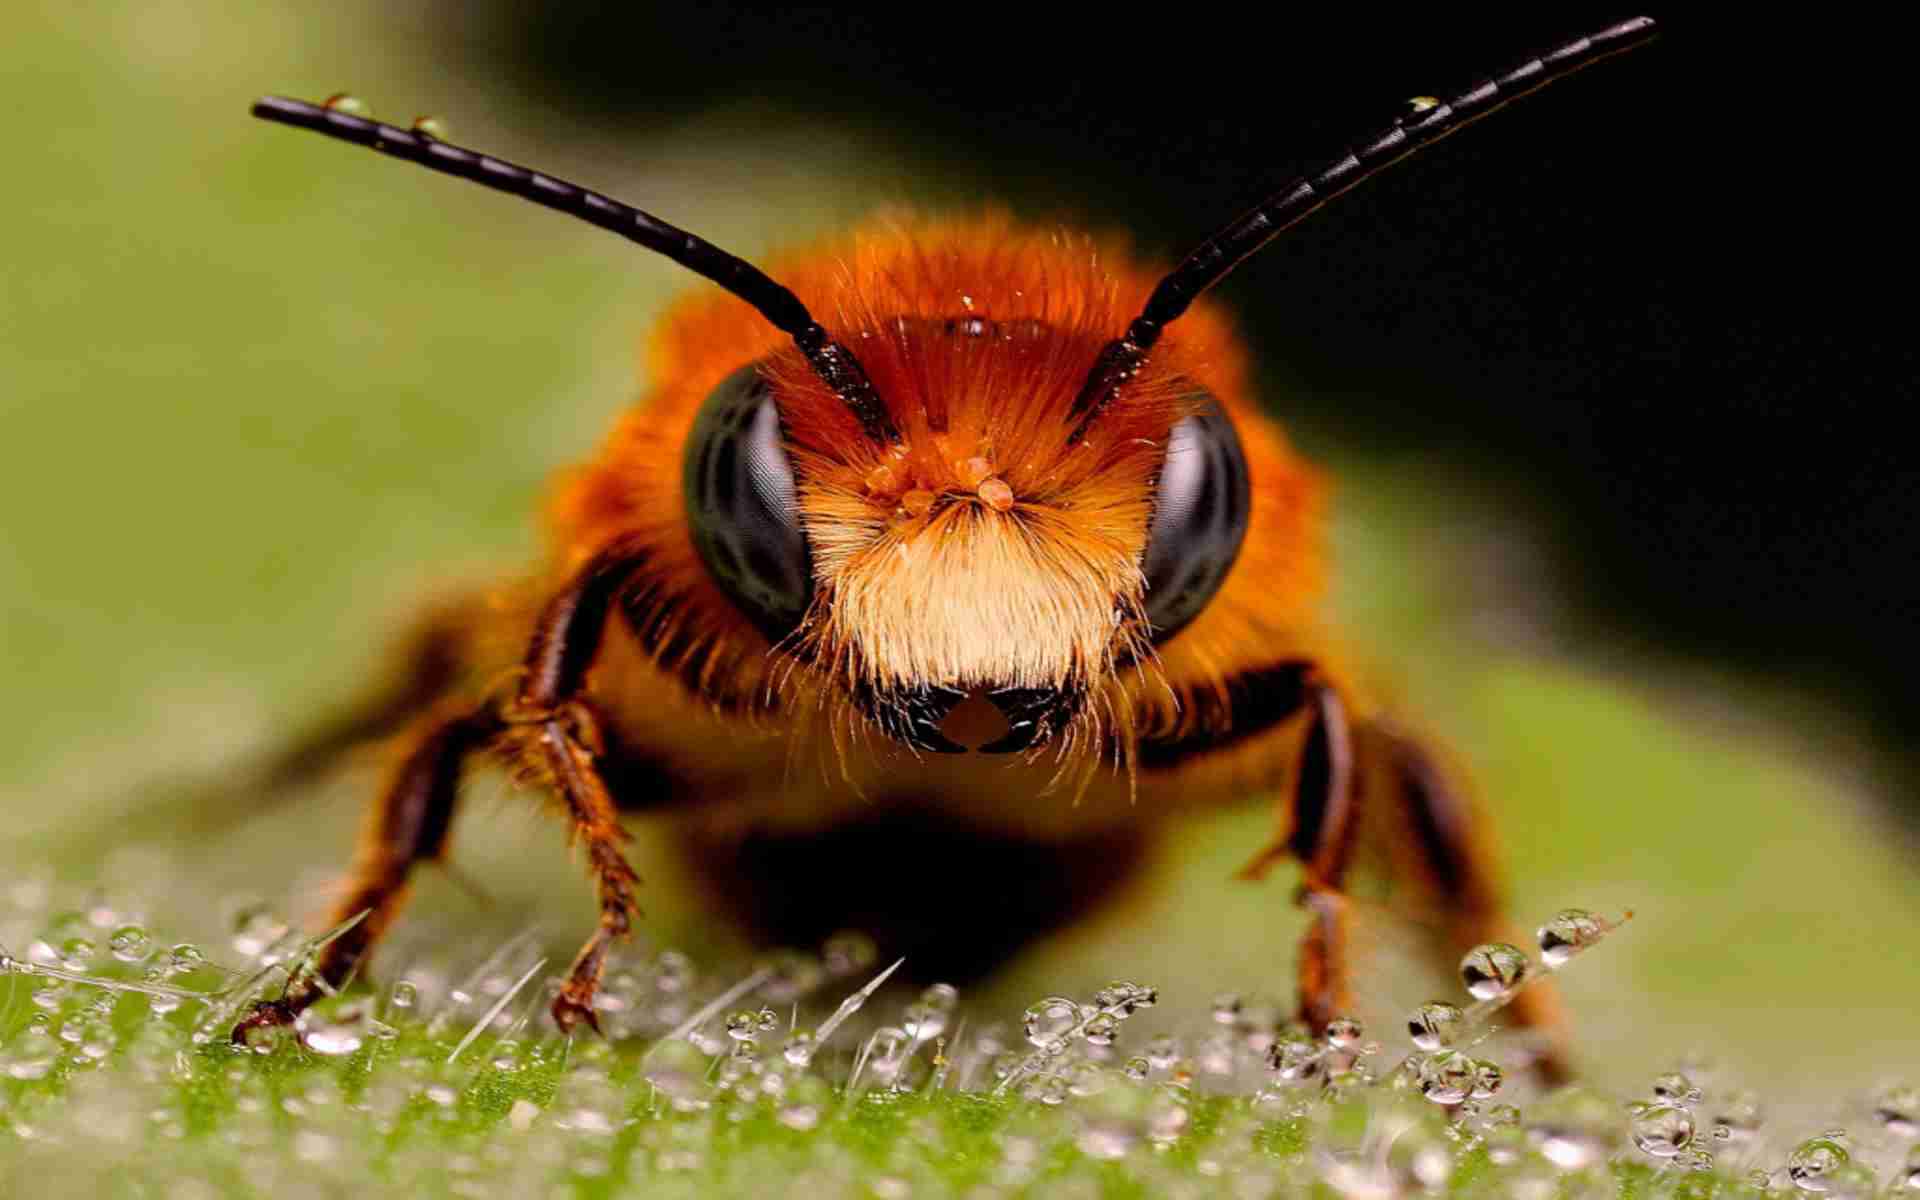 DOWNLOAD: bee-insect-eyes-surface free picture 2560 x 1600